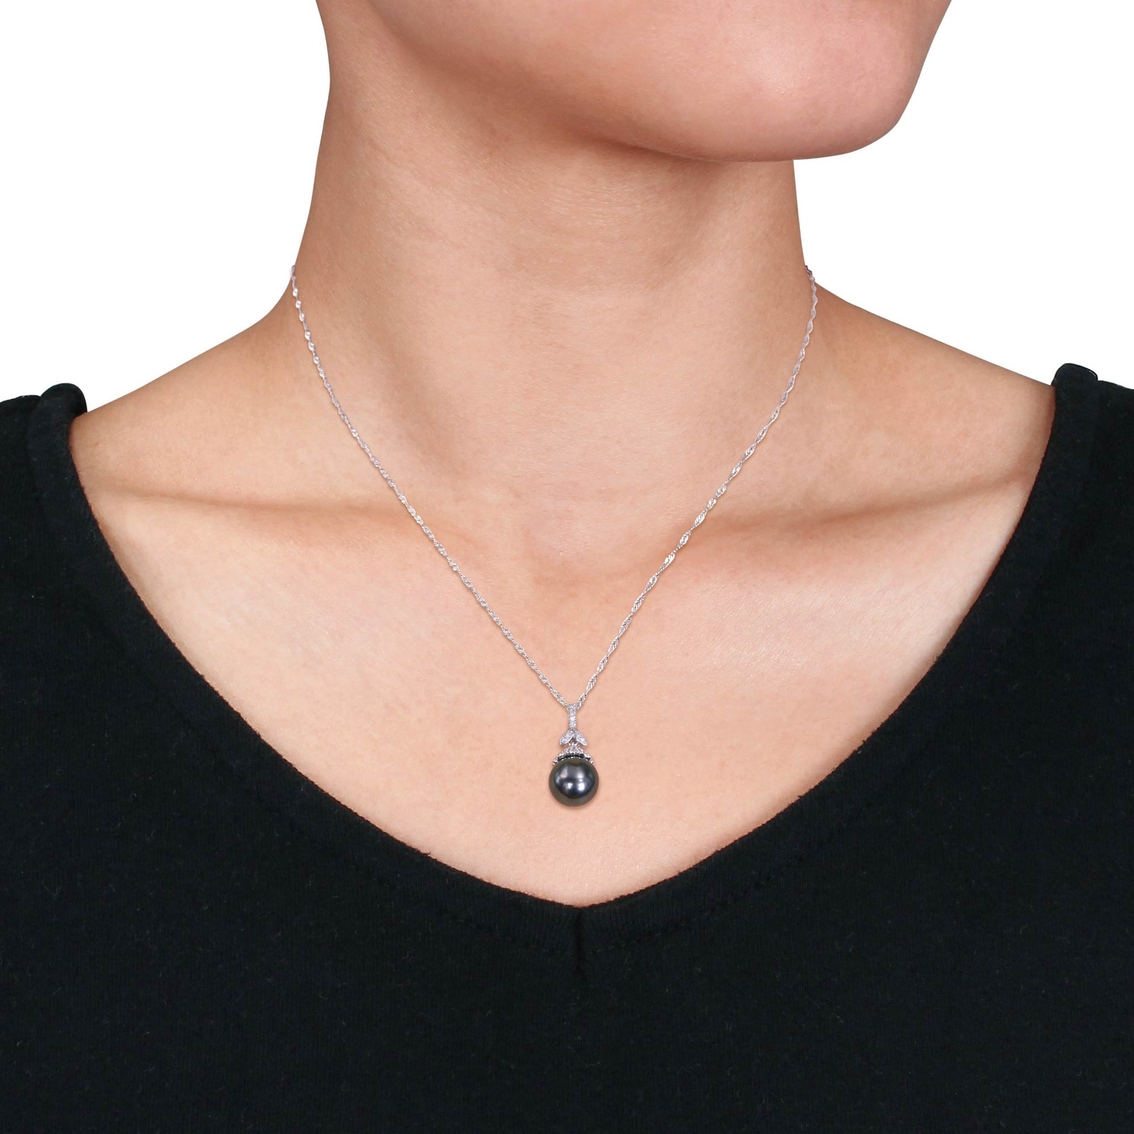 Michiko 14K White Gold Tahitian Cultured Pearl and 1/10 CTW Diamond Drop Necklace - Image 2 of 2